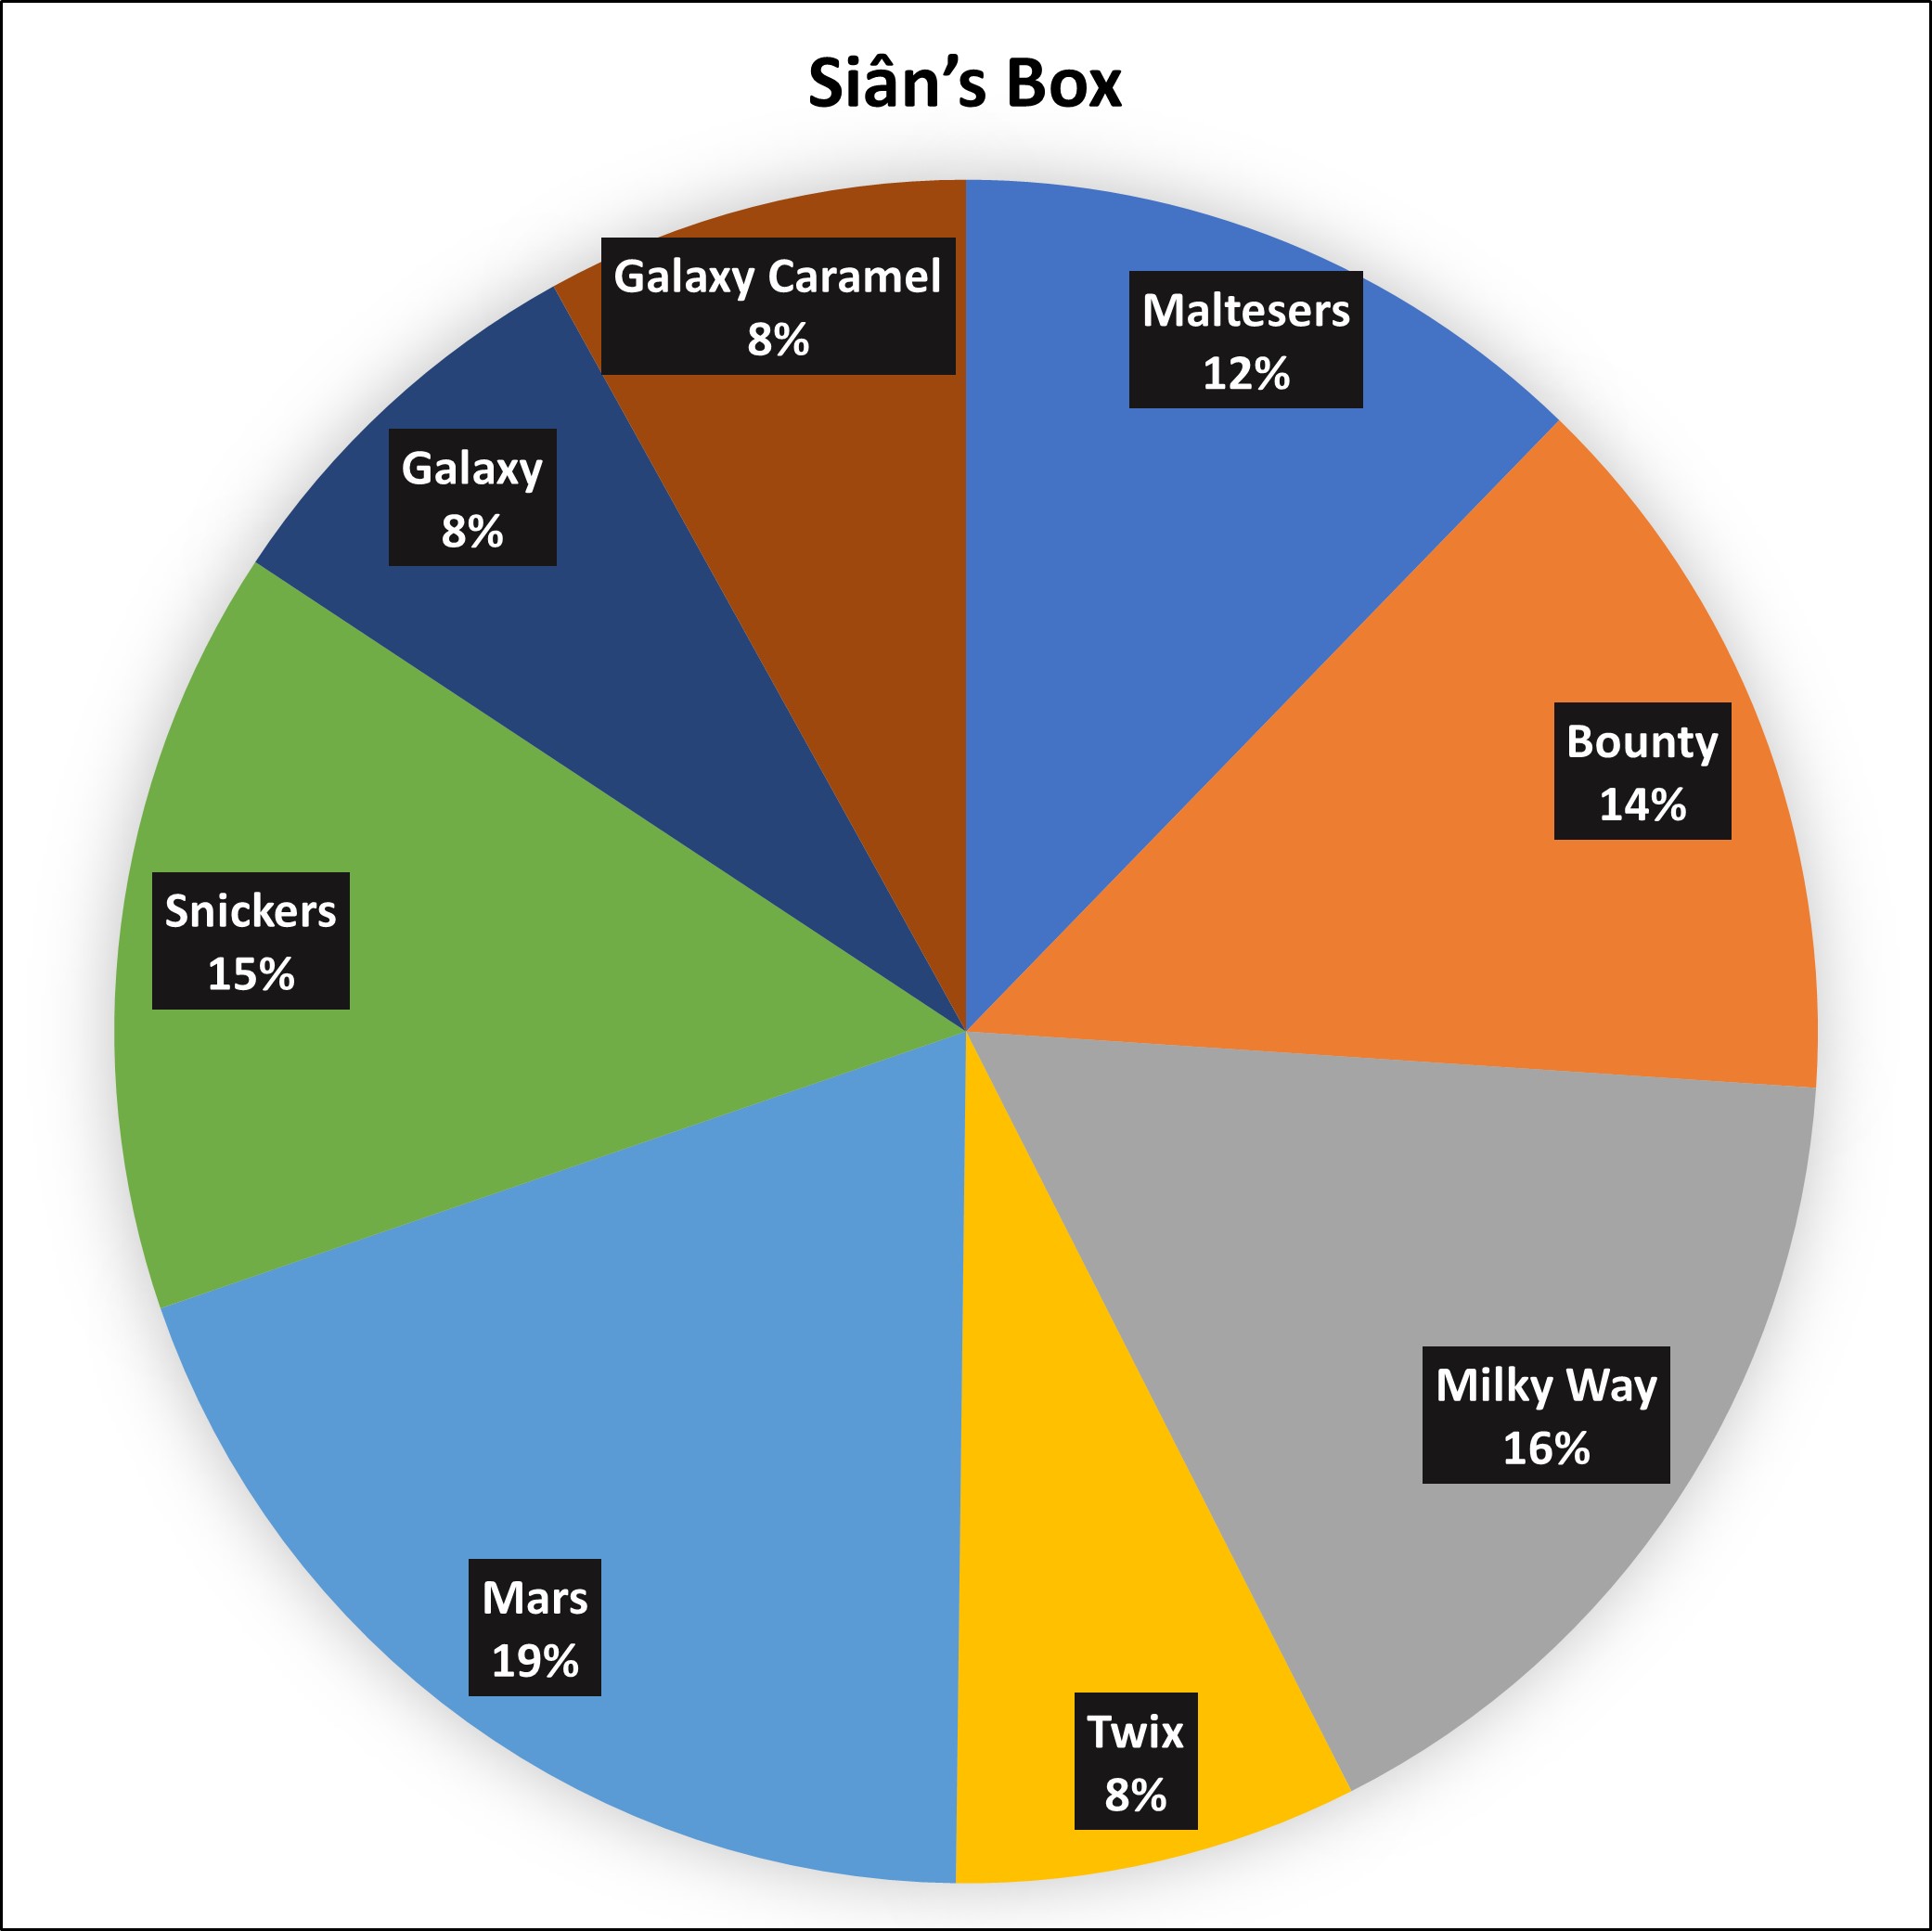 A pie chart for Siân's 2.4kg box of Celebrations. It is made up of; 12% Maltesers, 14% Bounty, 16% Milky Way, 8% Twix, 19% Mars, 15% Snickers, 8% Galaxy, 8% Galaxy Caramel.